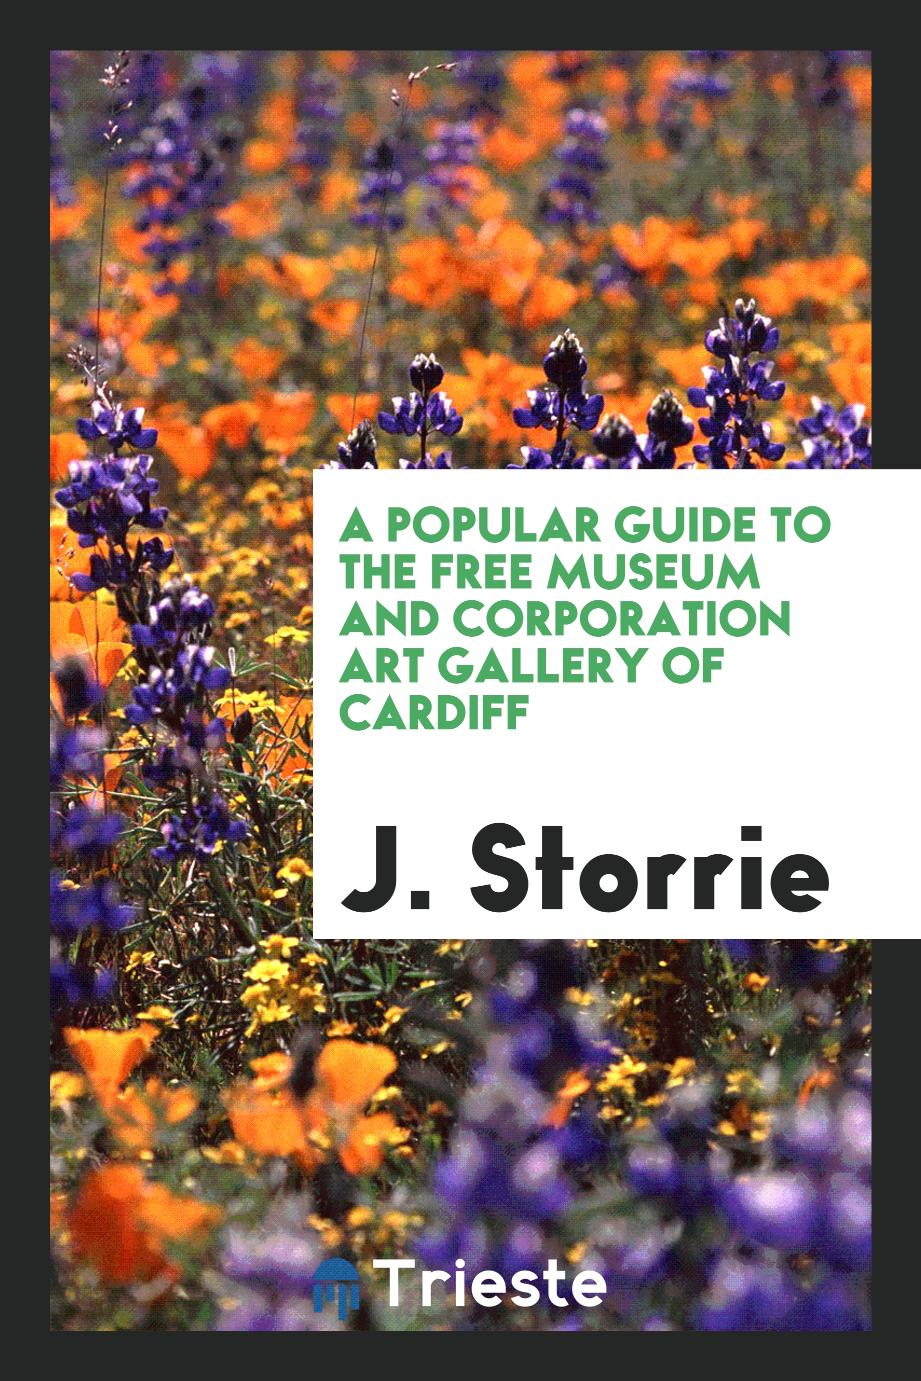 A popular guide to the Free museum and corporation art gallery of Cardiff